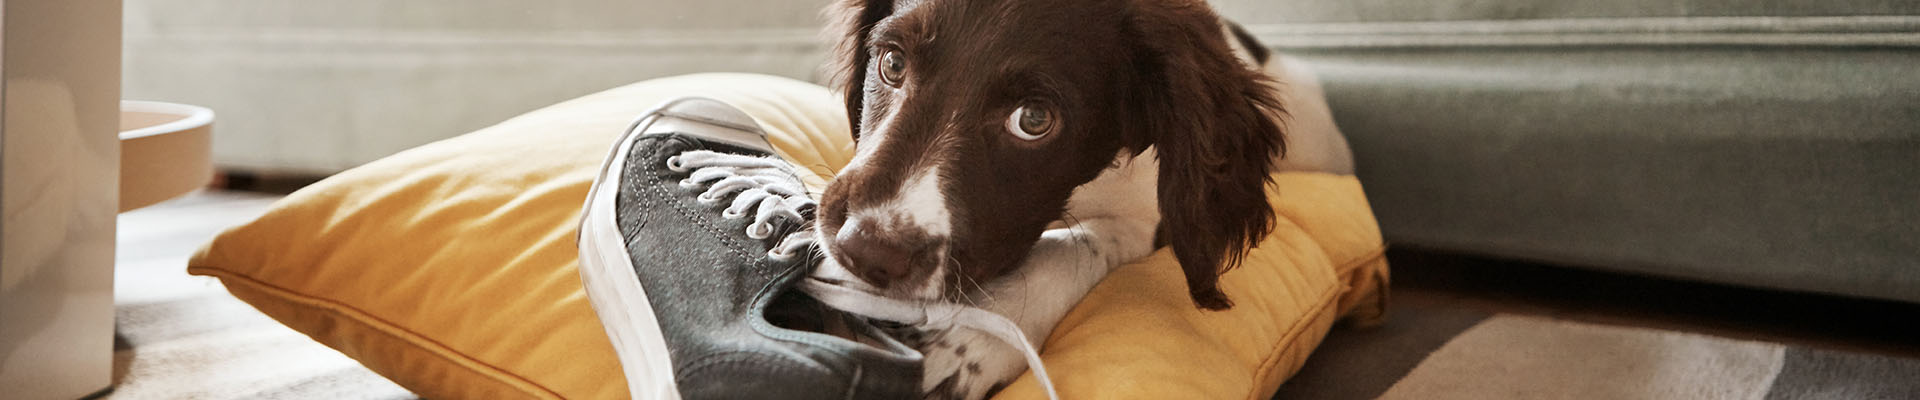 brown dog chewing shoe